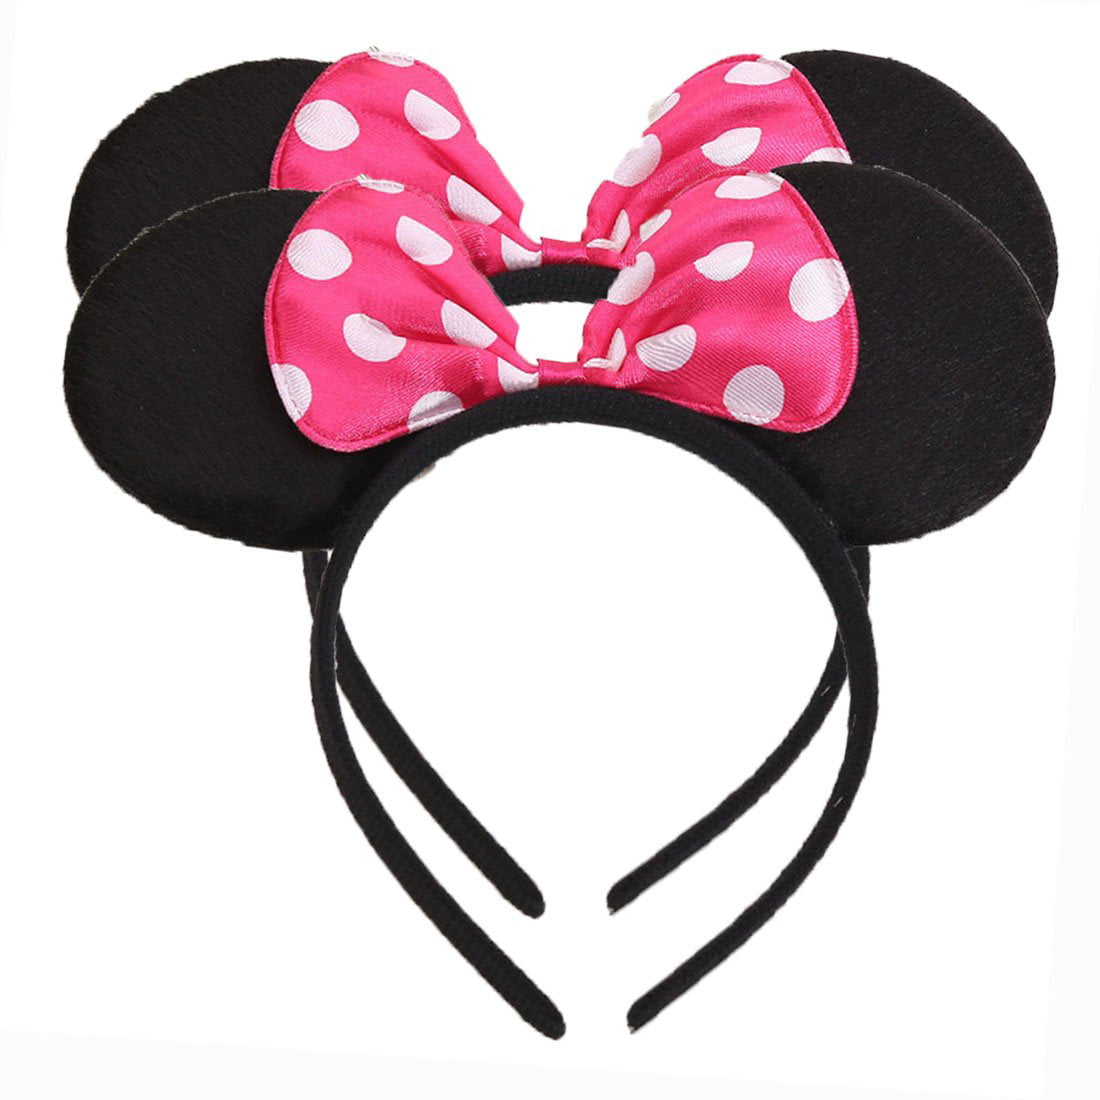 12 pcs pack DH Minnie & Mickey Mouse Ear and Red Bow Headband for Girls Birthday Costume Party 